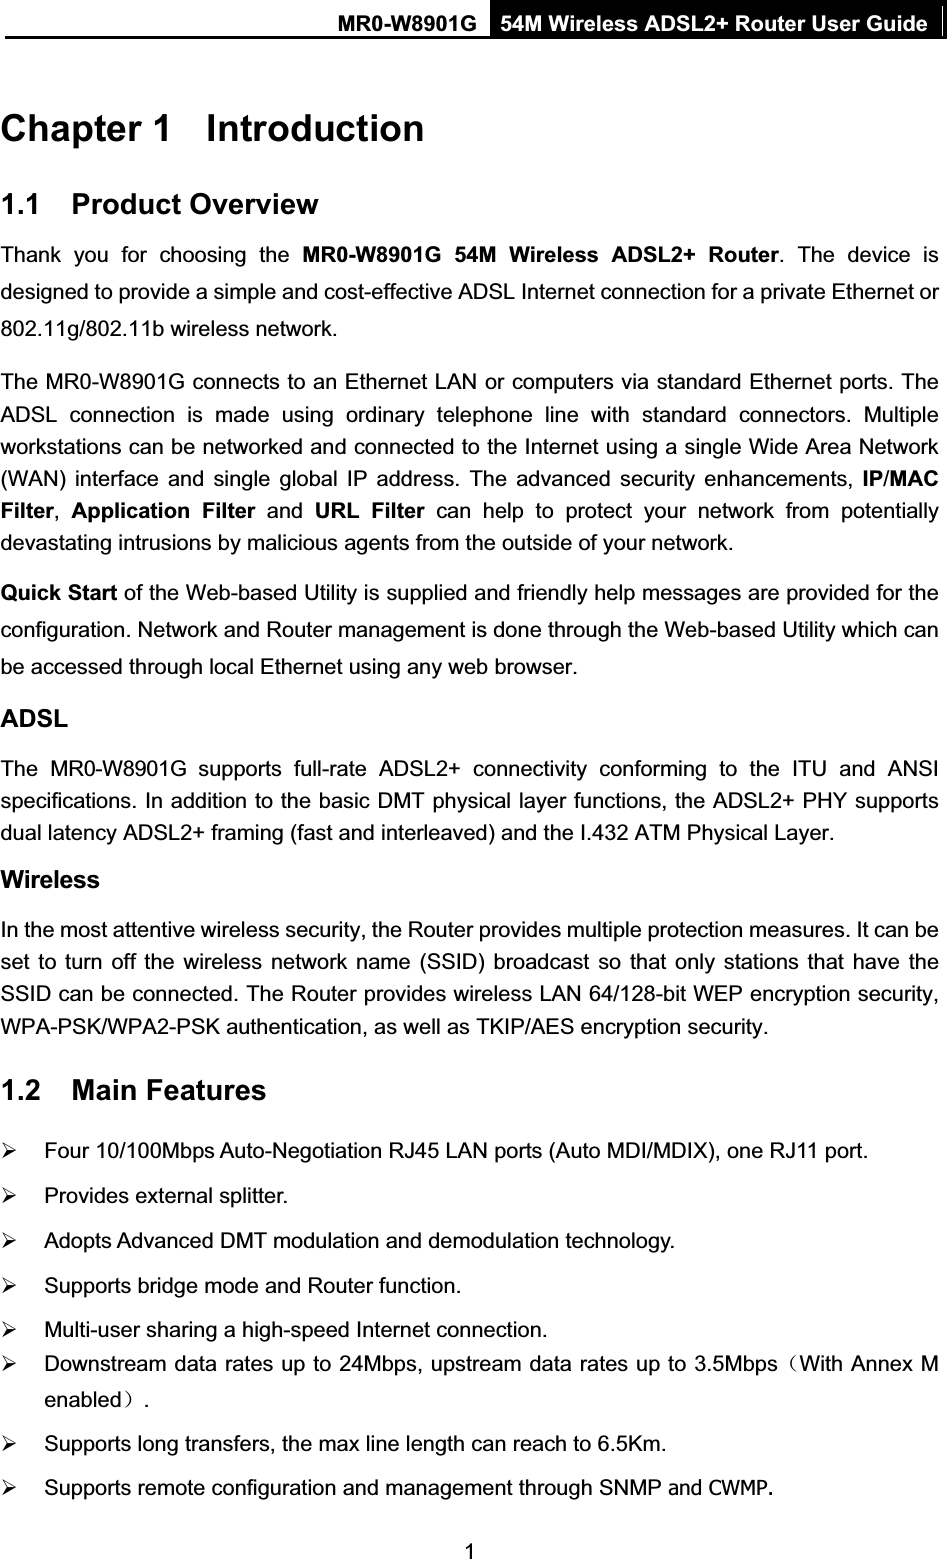 MR0-W8901G 54M Wireless ADSL2+ Router User Guide1Chapter 1  Introduction1.1 Product Overview Thank you for choosing the MR0-W8901G 54M Wireless ADSL2+ Router. The device is designed to provide a simple and cost-effective ADSL Internet connection for a private Ethernet or 802.11g/802.11b wireless network. The MR0-W8901G connects to an Ethernet LAN or computers via standard Ethernet ports. The ADSL connection is made using ordinary telephone line with standard connectors. Multiple workstations can be networked and connected to the Internet using a single Wide Area Network (WAN) interface and single global IP address. The advanced security enhancements, IP/MACFilter,Application Filter and URL Filter can help to protect your network from potentially devastating intrusions by malicious agents from the outside of your network. Quick Start of the Web-based Utility is supplied and friendly help messages are provided for the configuration. Network and Router management is done through the Web-based Utility which can be accessed through local Ethernet using any web browser. ADSLThe MR0-W8901G supports full-rate ADSL2+ connectivity conforming to the ITU and ANSI specifications. In addition to the basic DMT physical layer functions, the ADSL2+ PHY supports dual latency ADSL2+ framing (fast and interleaved) and the I.432 ATM Physical Layer. WirelessIn the most attentive wireless security, the Router provides multiple protection measures. It can be set to turn off the wireless network name (SSID) broadcast so that only stations that have the SSID can be connected. The Router provides wireless LAN 64/128-bit WEP encryption security, WPA-PSK/WPA2-PSK authentication, as well as TKIP/AES encryption security. 1.2 Main Features ¾  Four 10/100Mbps Auto-Negotiation RJ45 LAN ports (Auto MDI/MDIX), one RJ11 port. ¾  Provides external splitter. ¾  Adopts Advanced DMT modulation and demodulation technology. ¾  Supports bridge mode and Router function. ¾  Multi-user sharing a high-speed Internet connection. ¾  Downstream data rates up to 24Mbps, upstream data rates up to 3.5Mbps˄With Annex M enabled˅.¾  Supports long transfers, the max line length can reach to 6.5Km. ¾  Supports remote configuration and management through SNMP and CWMP.